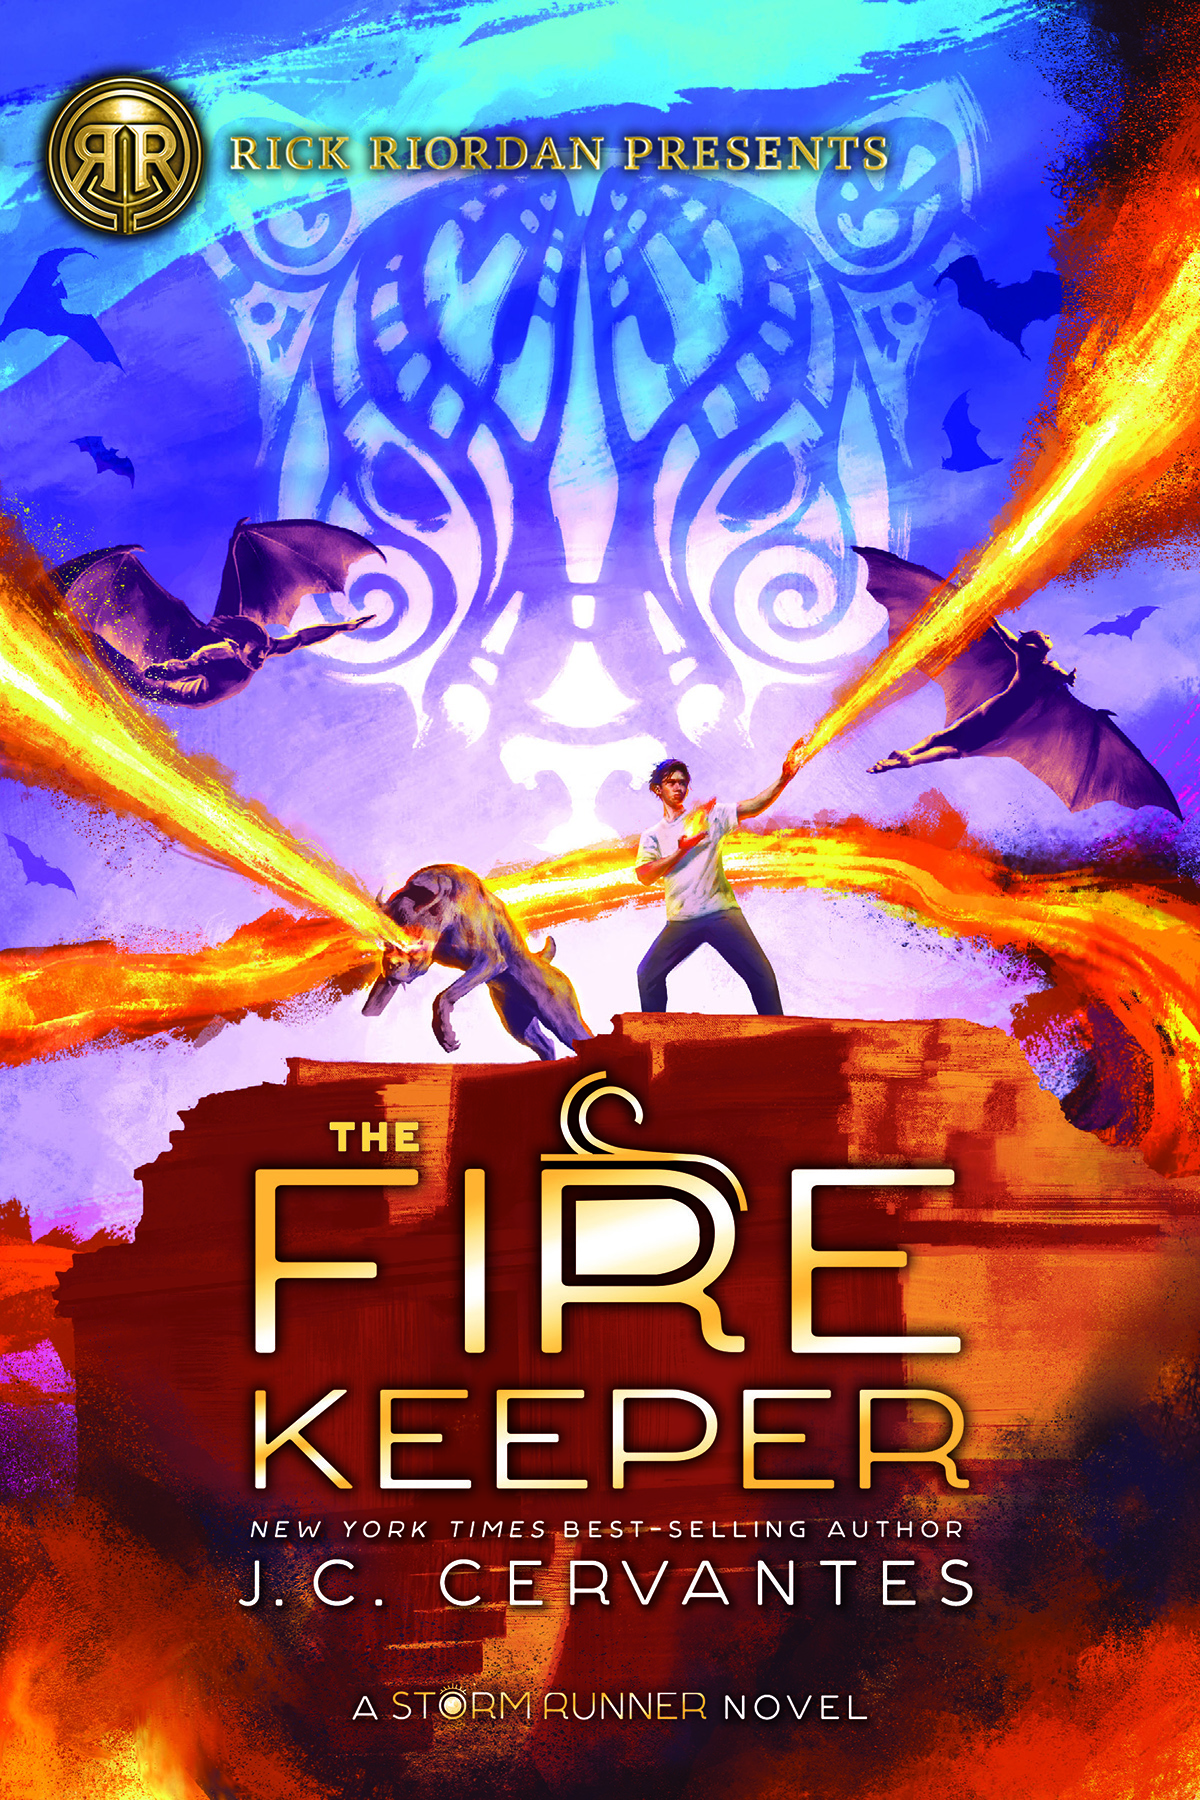 The Fire Keeper